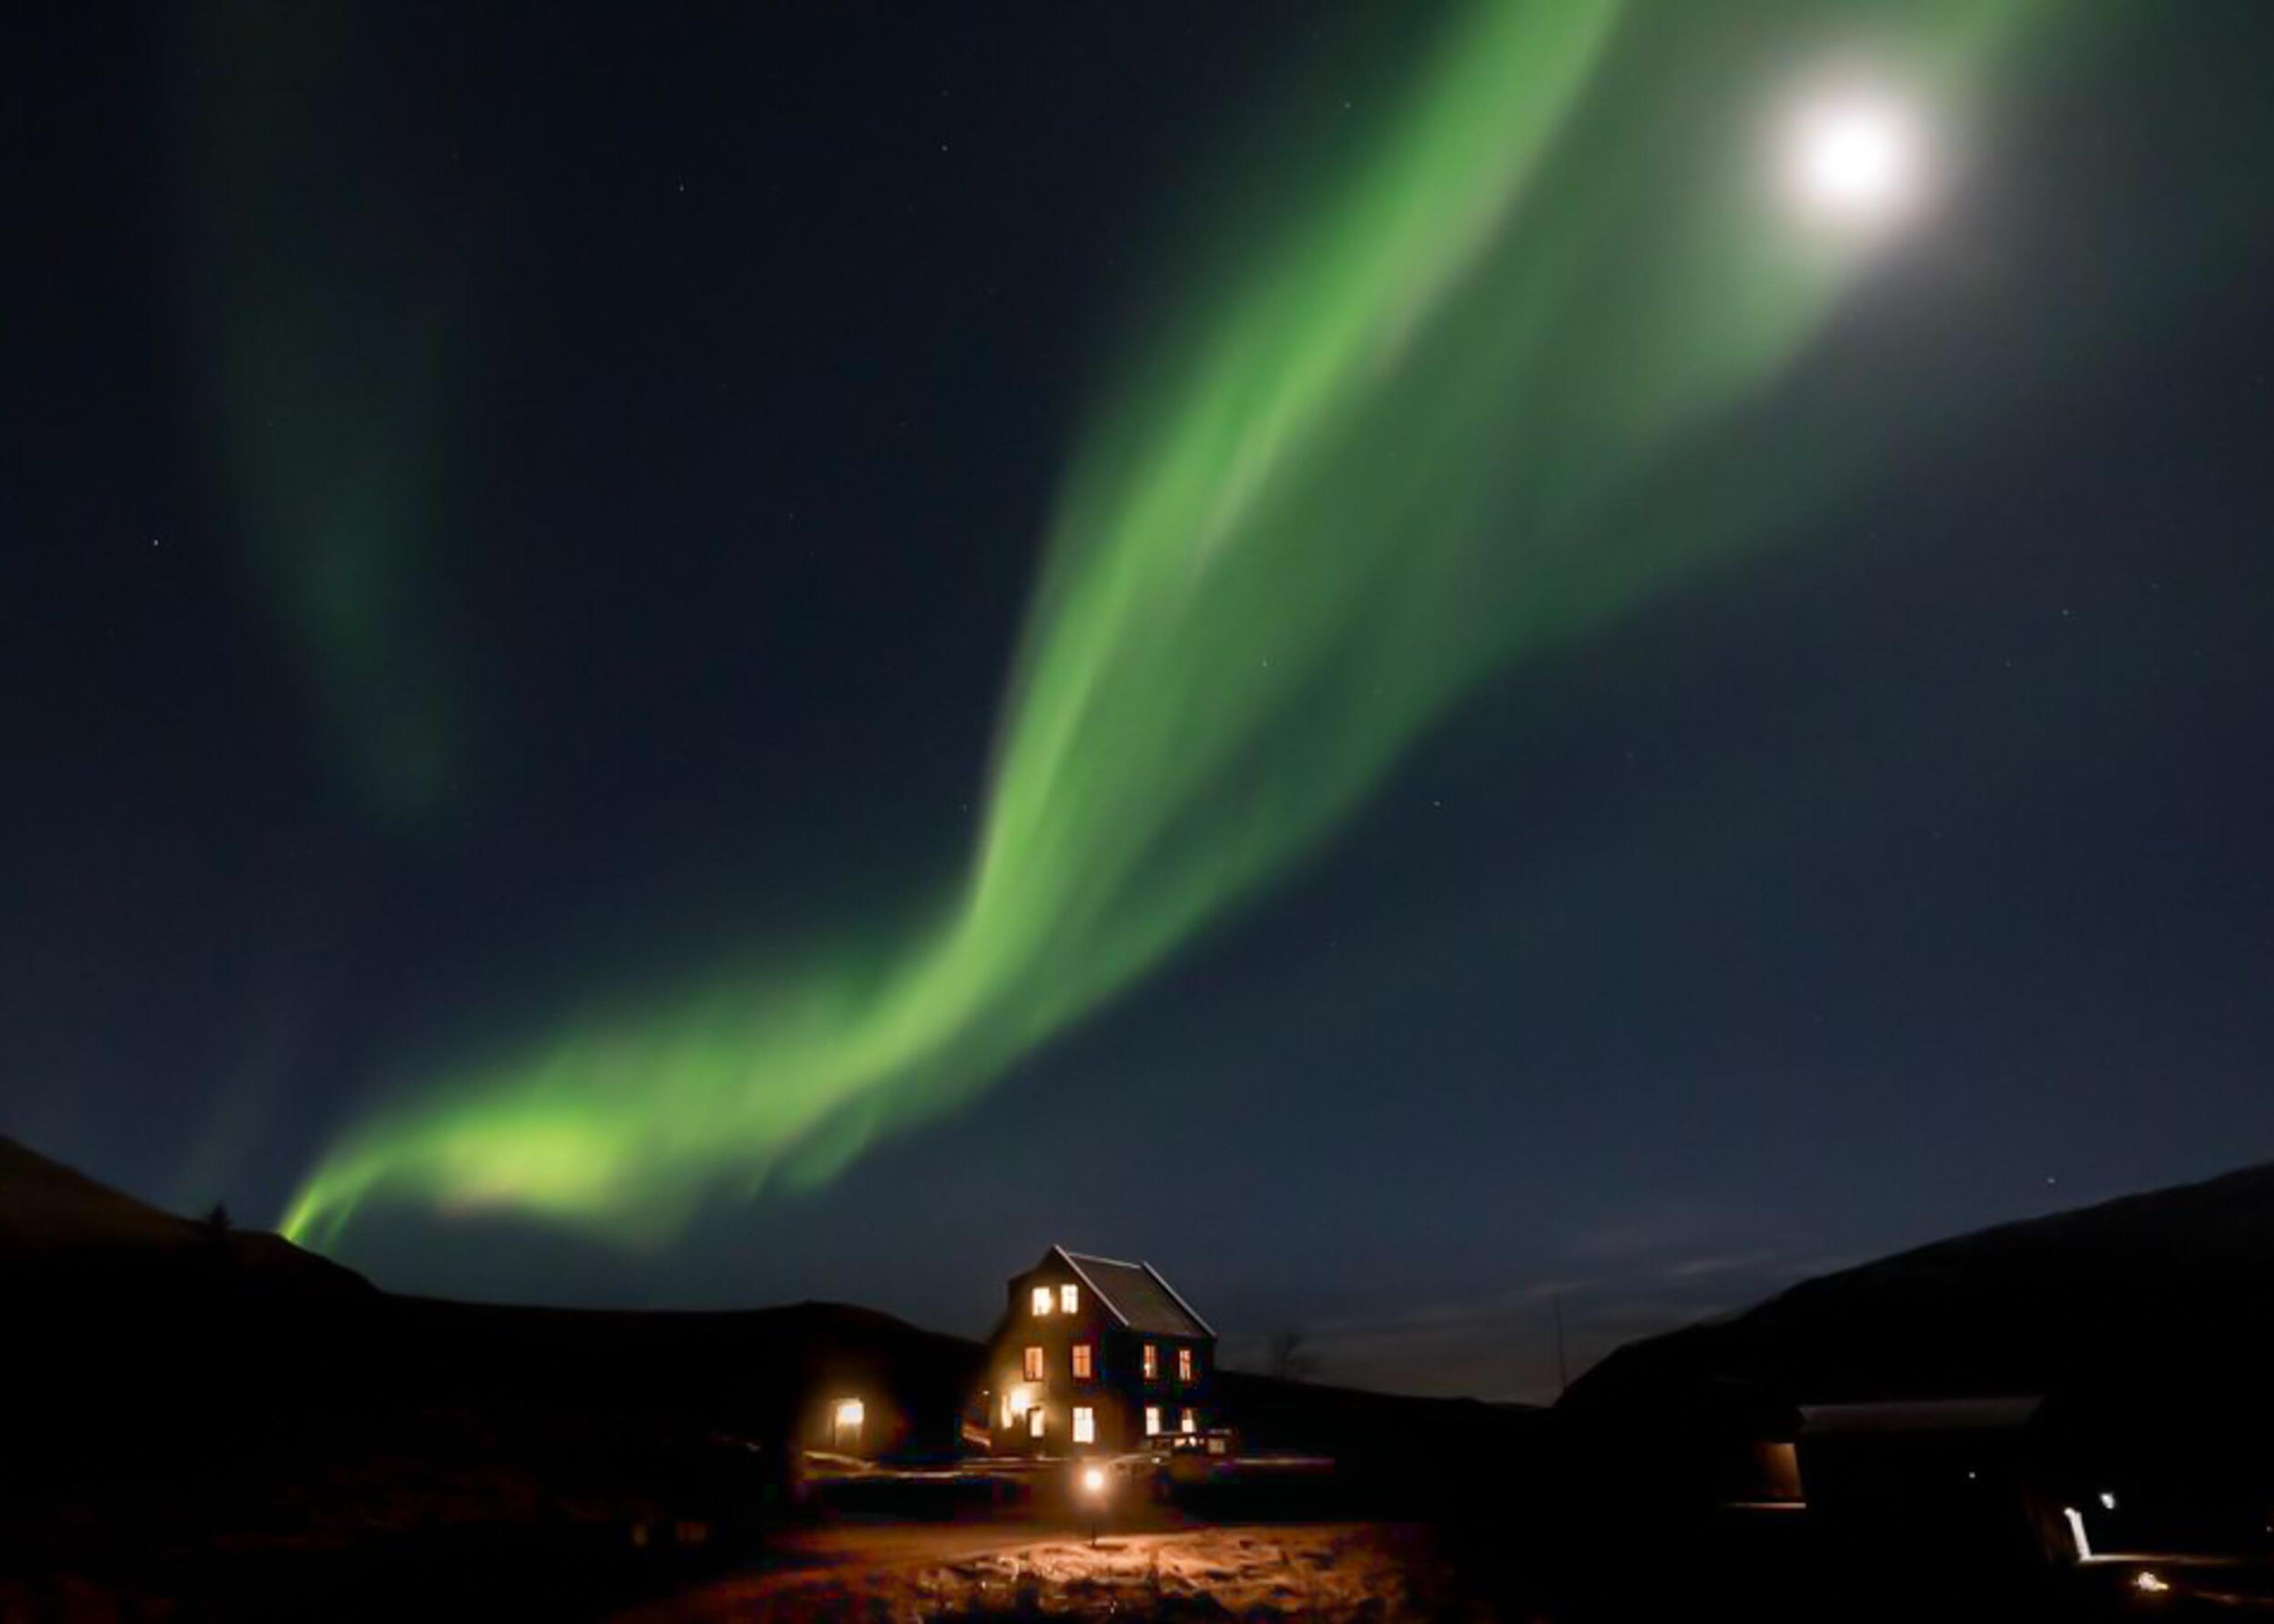 A solitary house stands under the night sky, bathed in the ethereal glow of the Northern Lights, their vibrant dance casting an otherworldly luminescence over the quiet landscape.